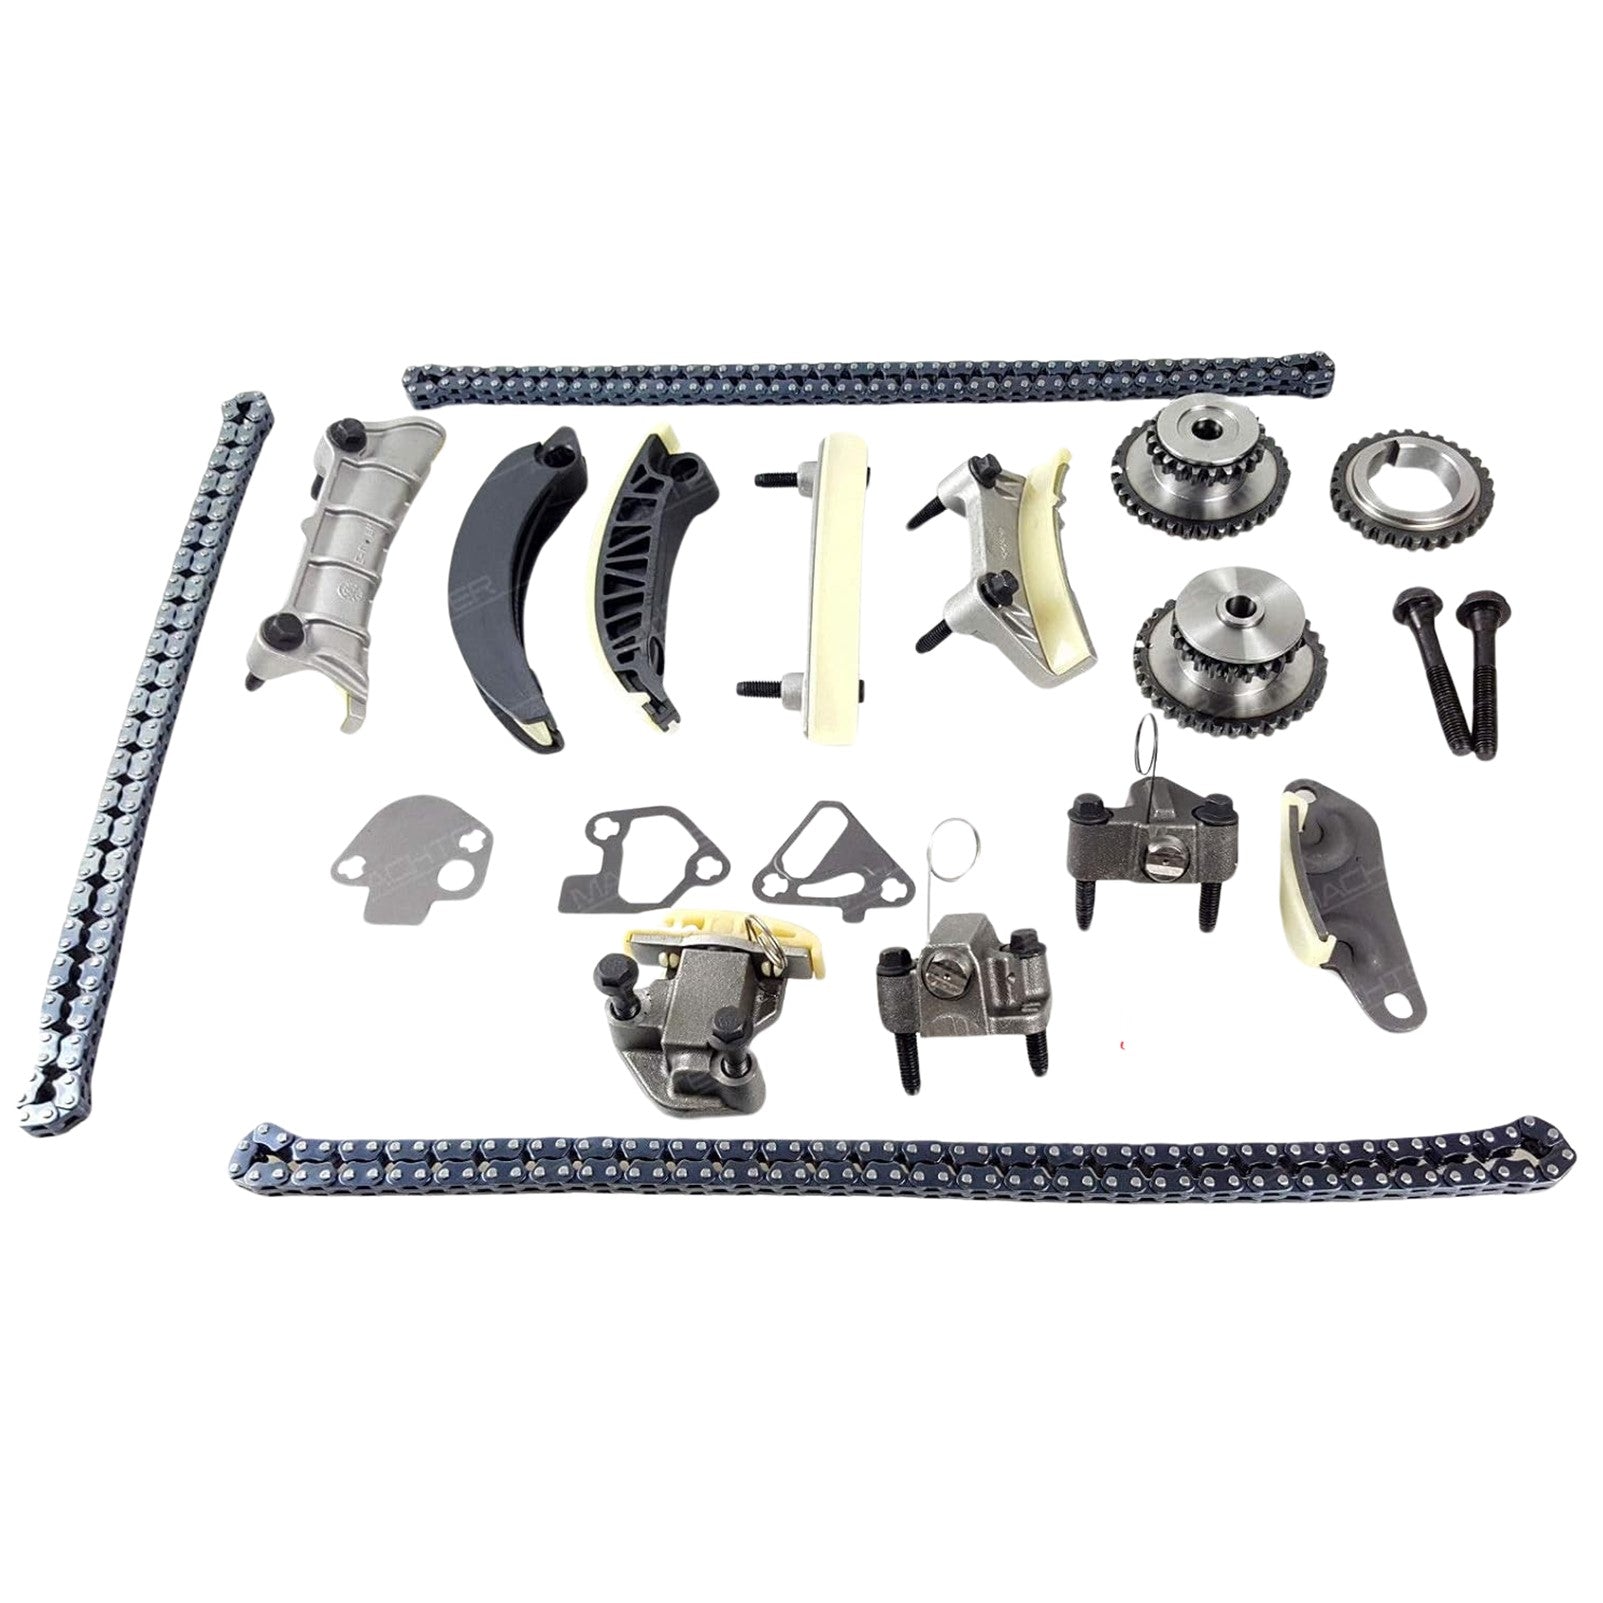 Timing Chain Kit - Holden Commodore VZ VE VF 3.6L LE0 LW2 LWR